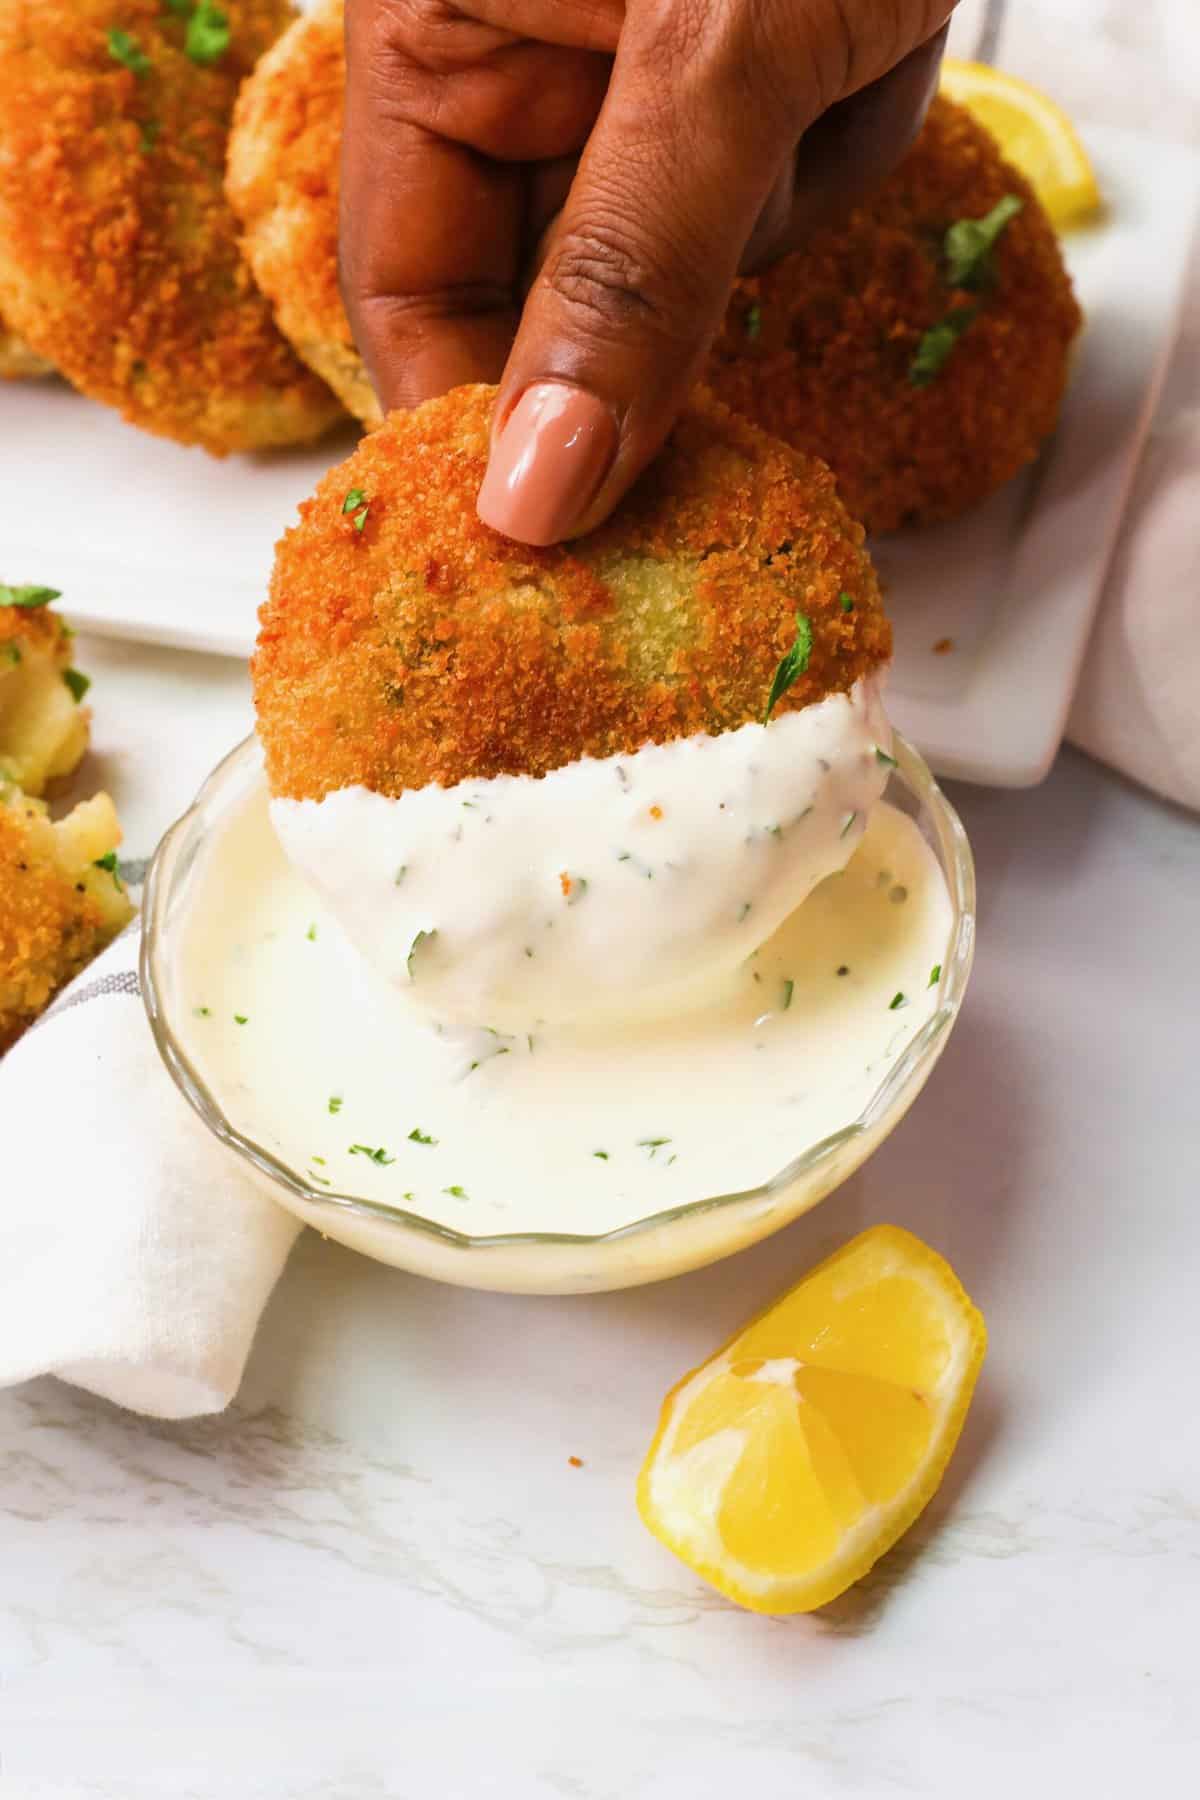 Dipping delicate fish cakes into homemade tartar sauce